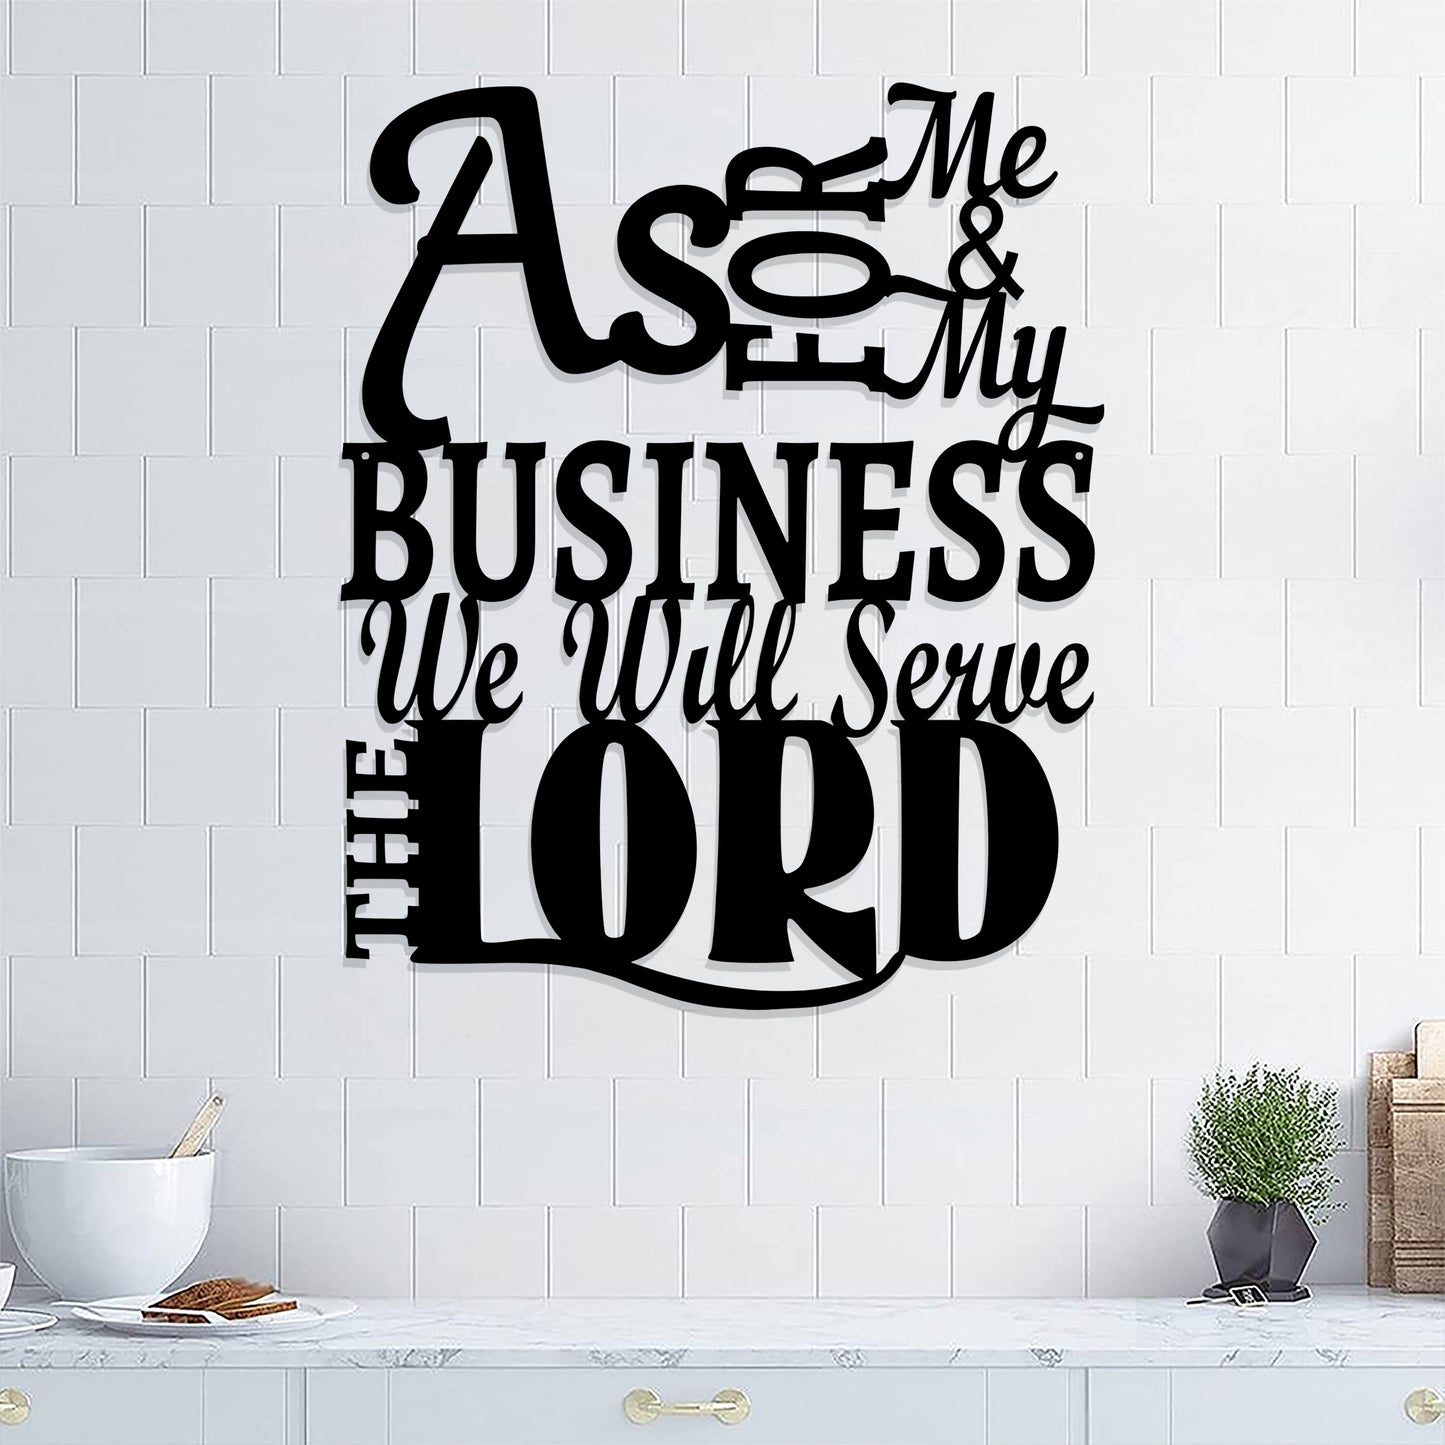 As For Me & My Business We Will Serve The Lord Metal Sign - Christian Metal Wall Art - Religious Metal Wall Art